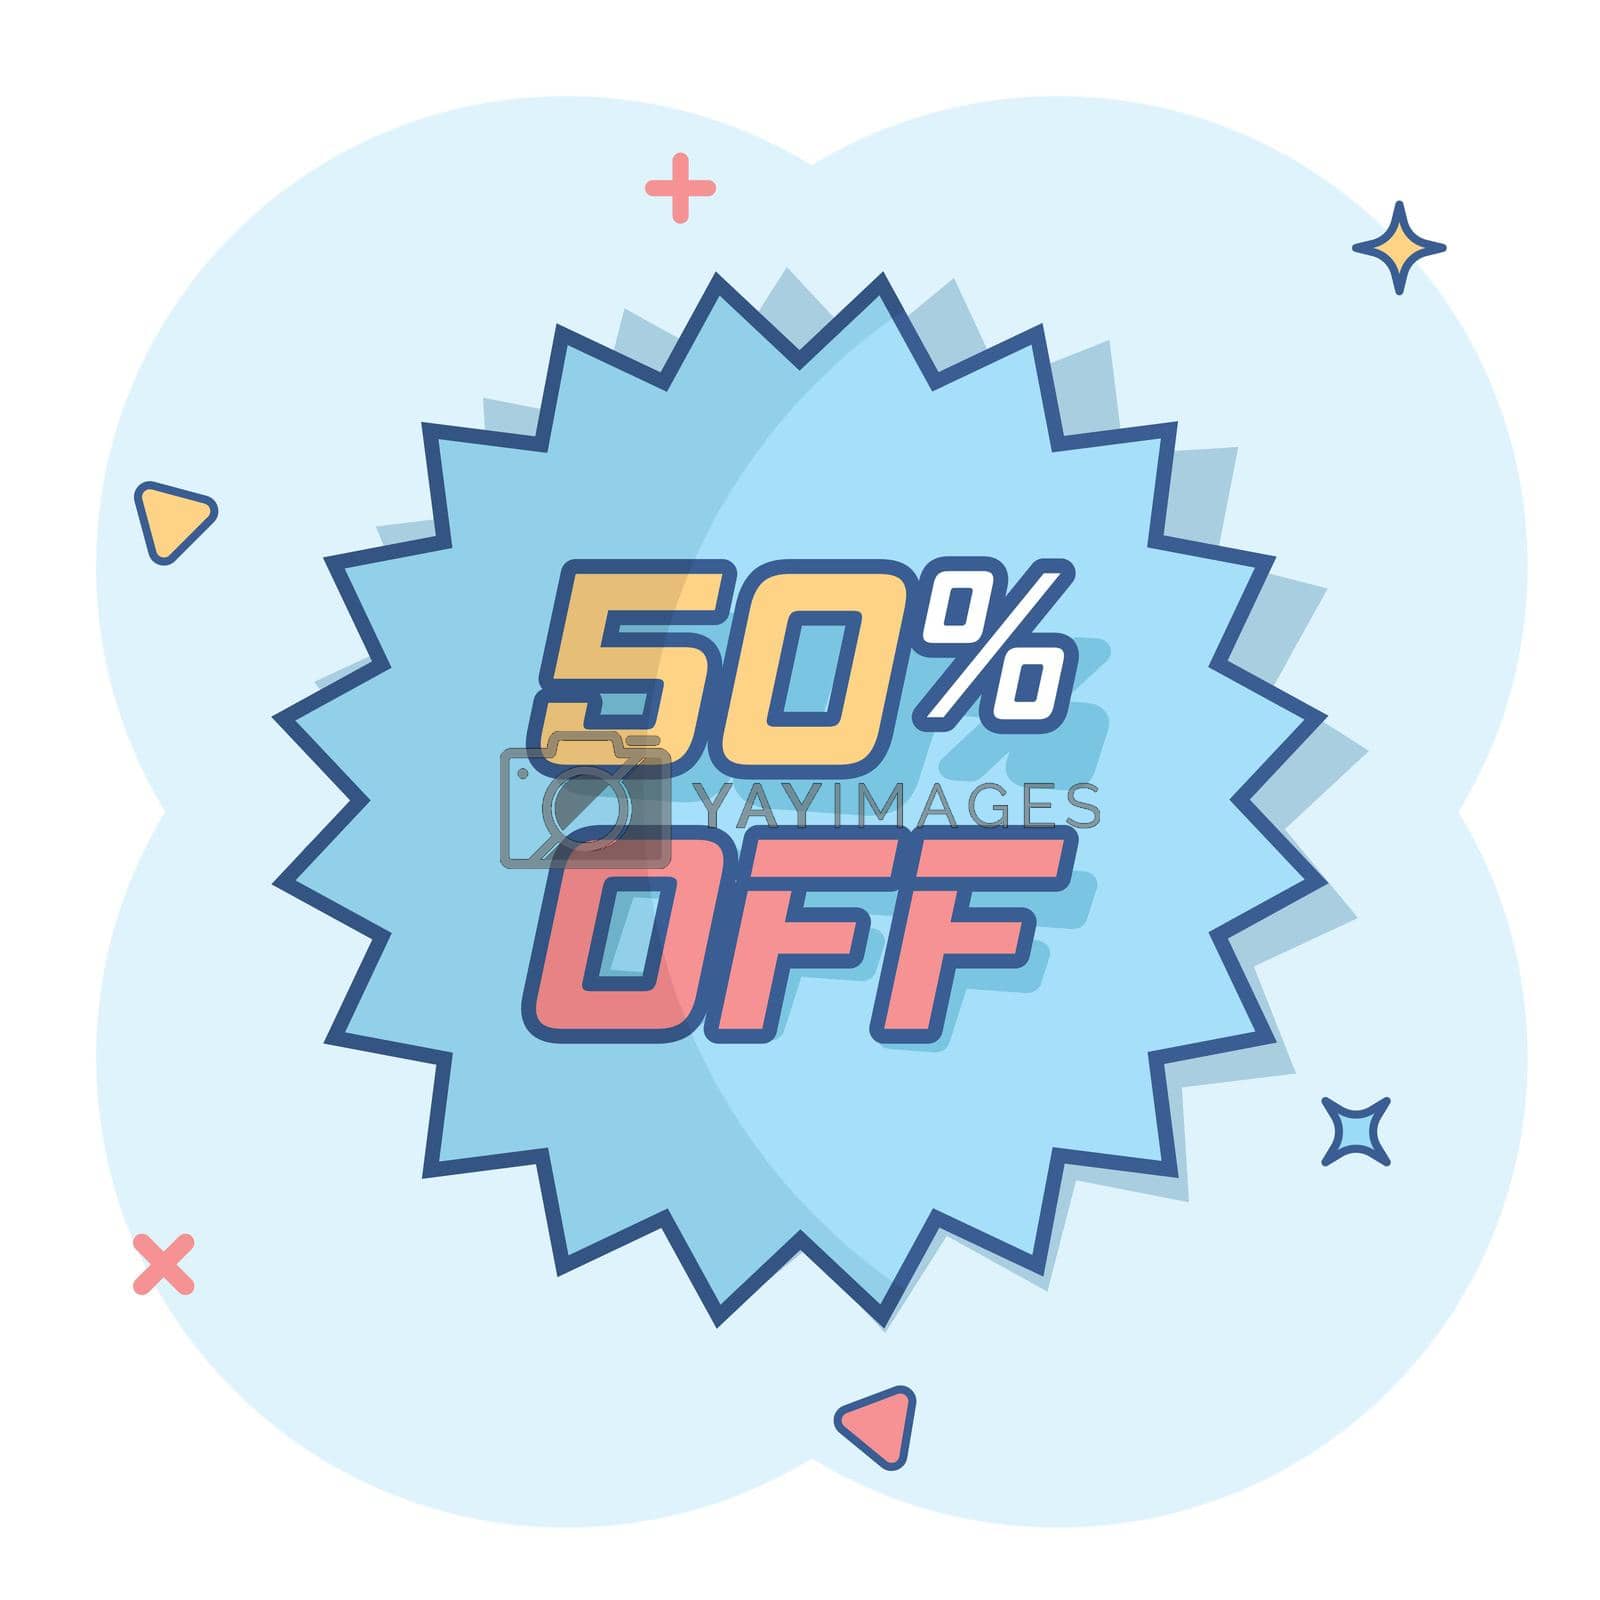 Royalty free image of Vector cartoon discount sticker icon in comic style. Sale tag illustration pictogram. Promotion 50 percent discount splash effect concept. by LysenkoA